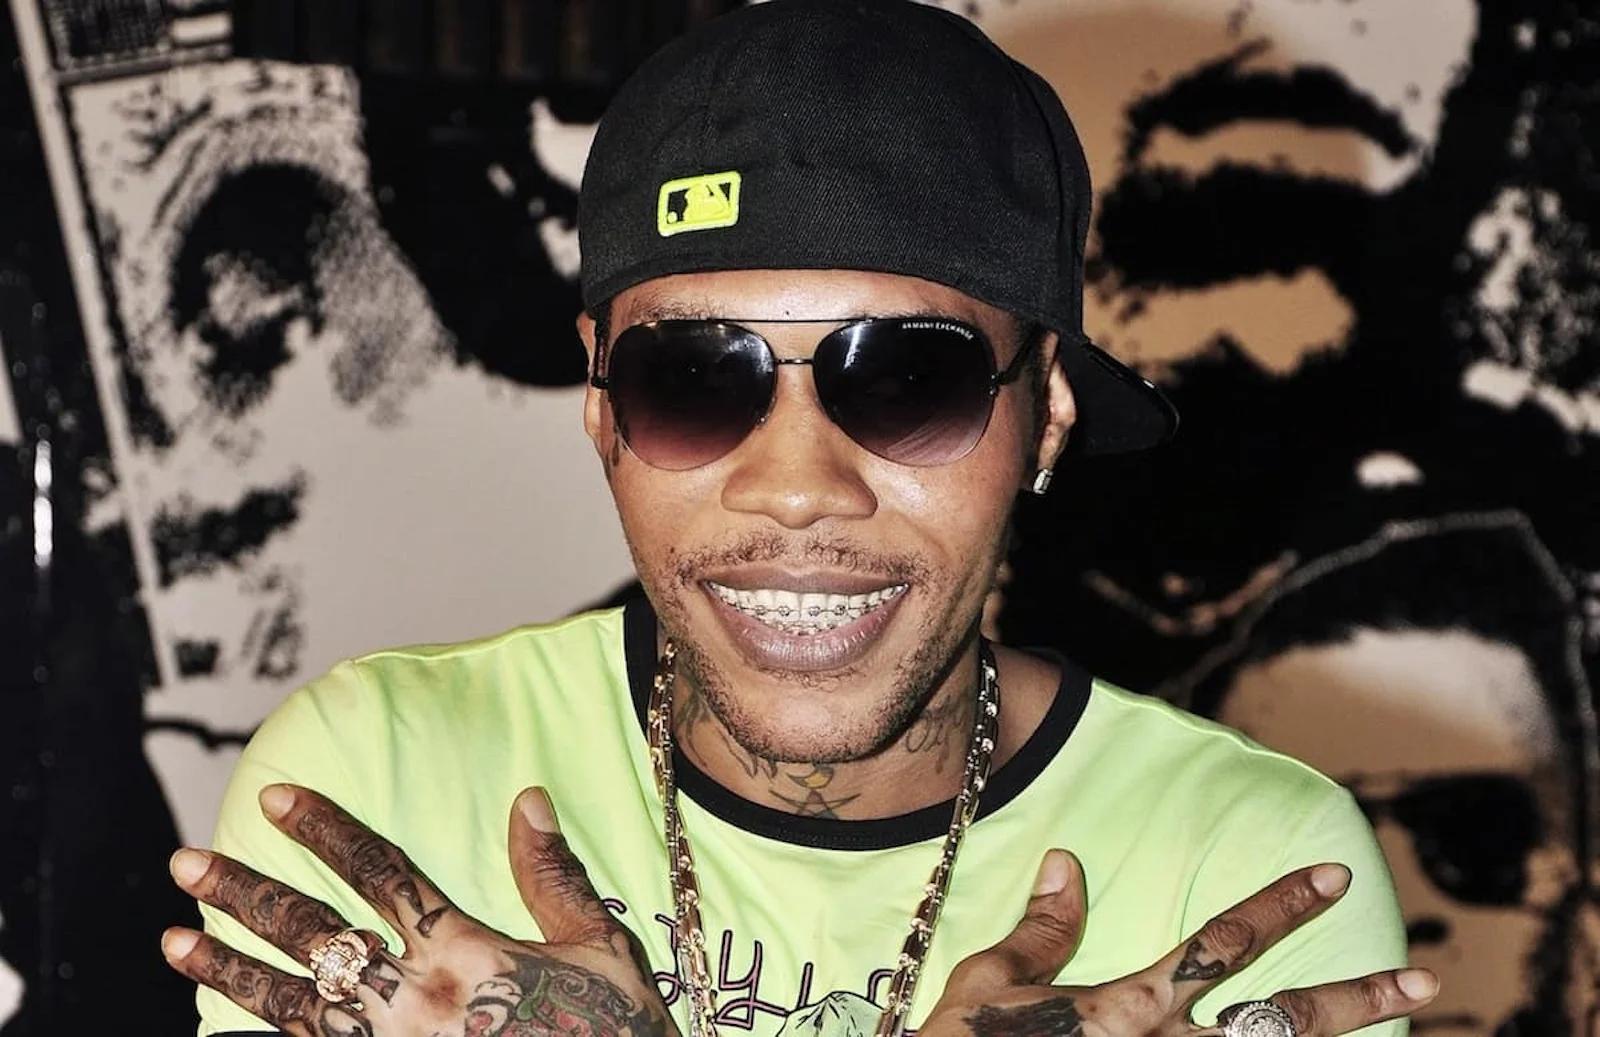 Vybz Kartel Debuts New Song “Fire Vybz (Crush Grabba)” To Promote His Product [Video]